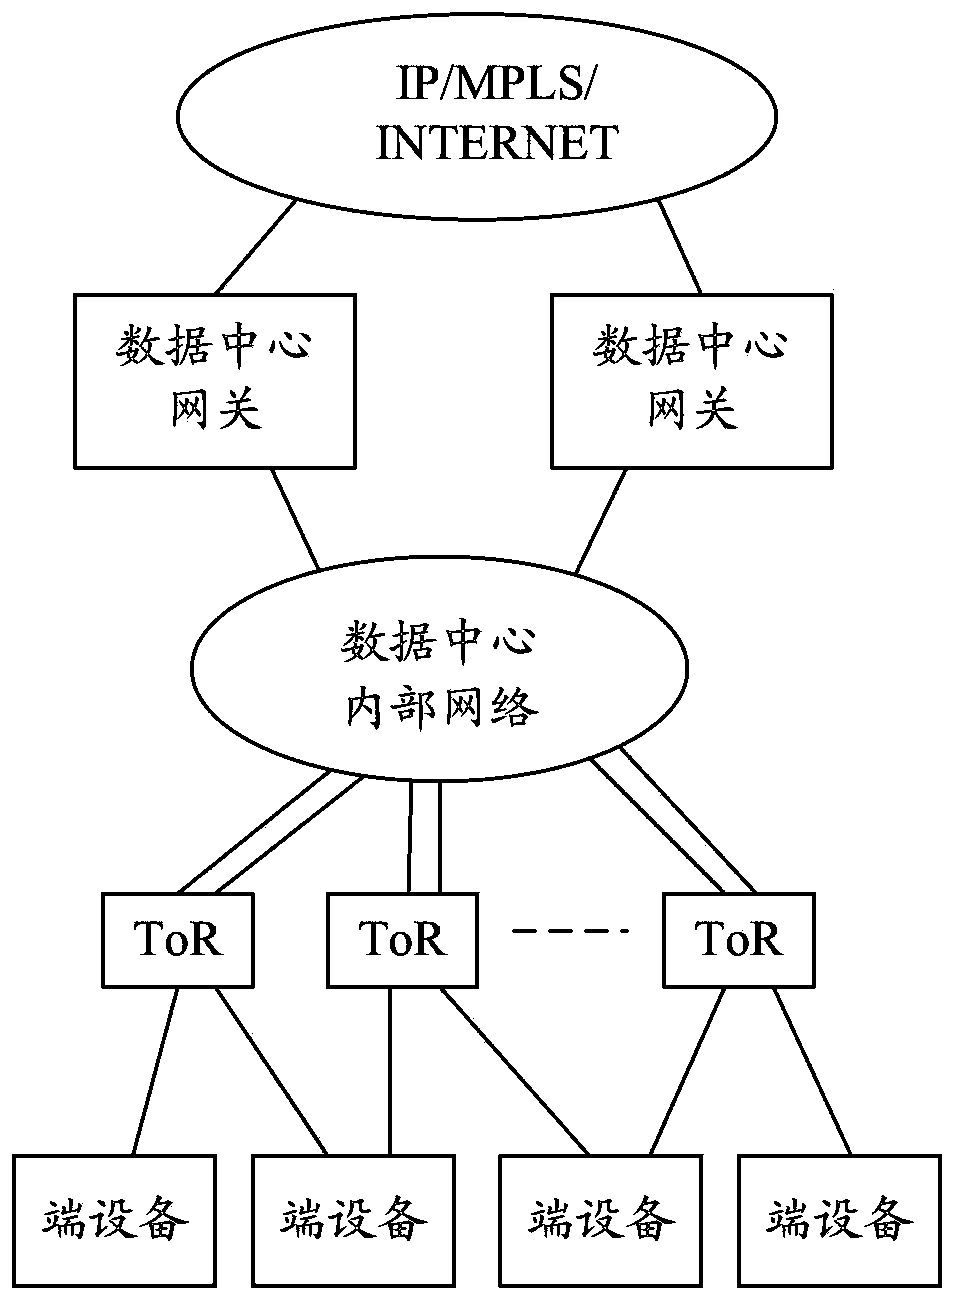 Virtual network access method and system